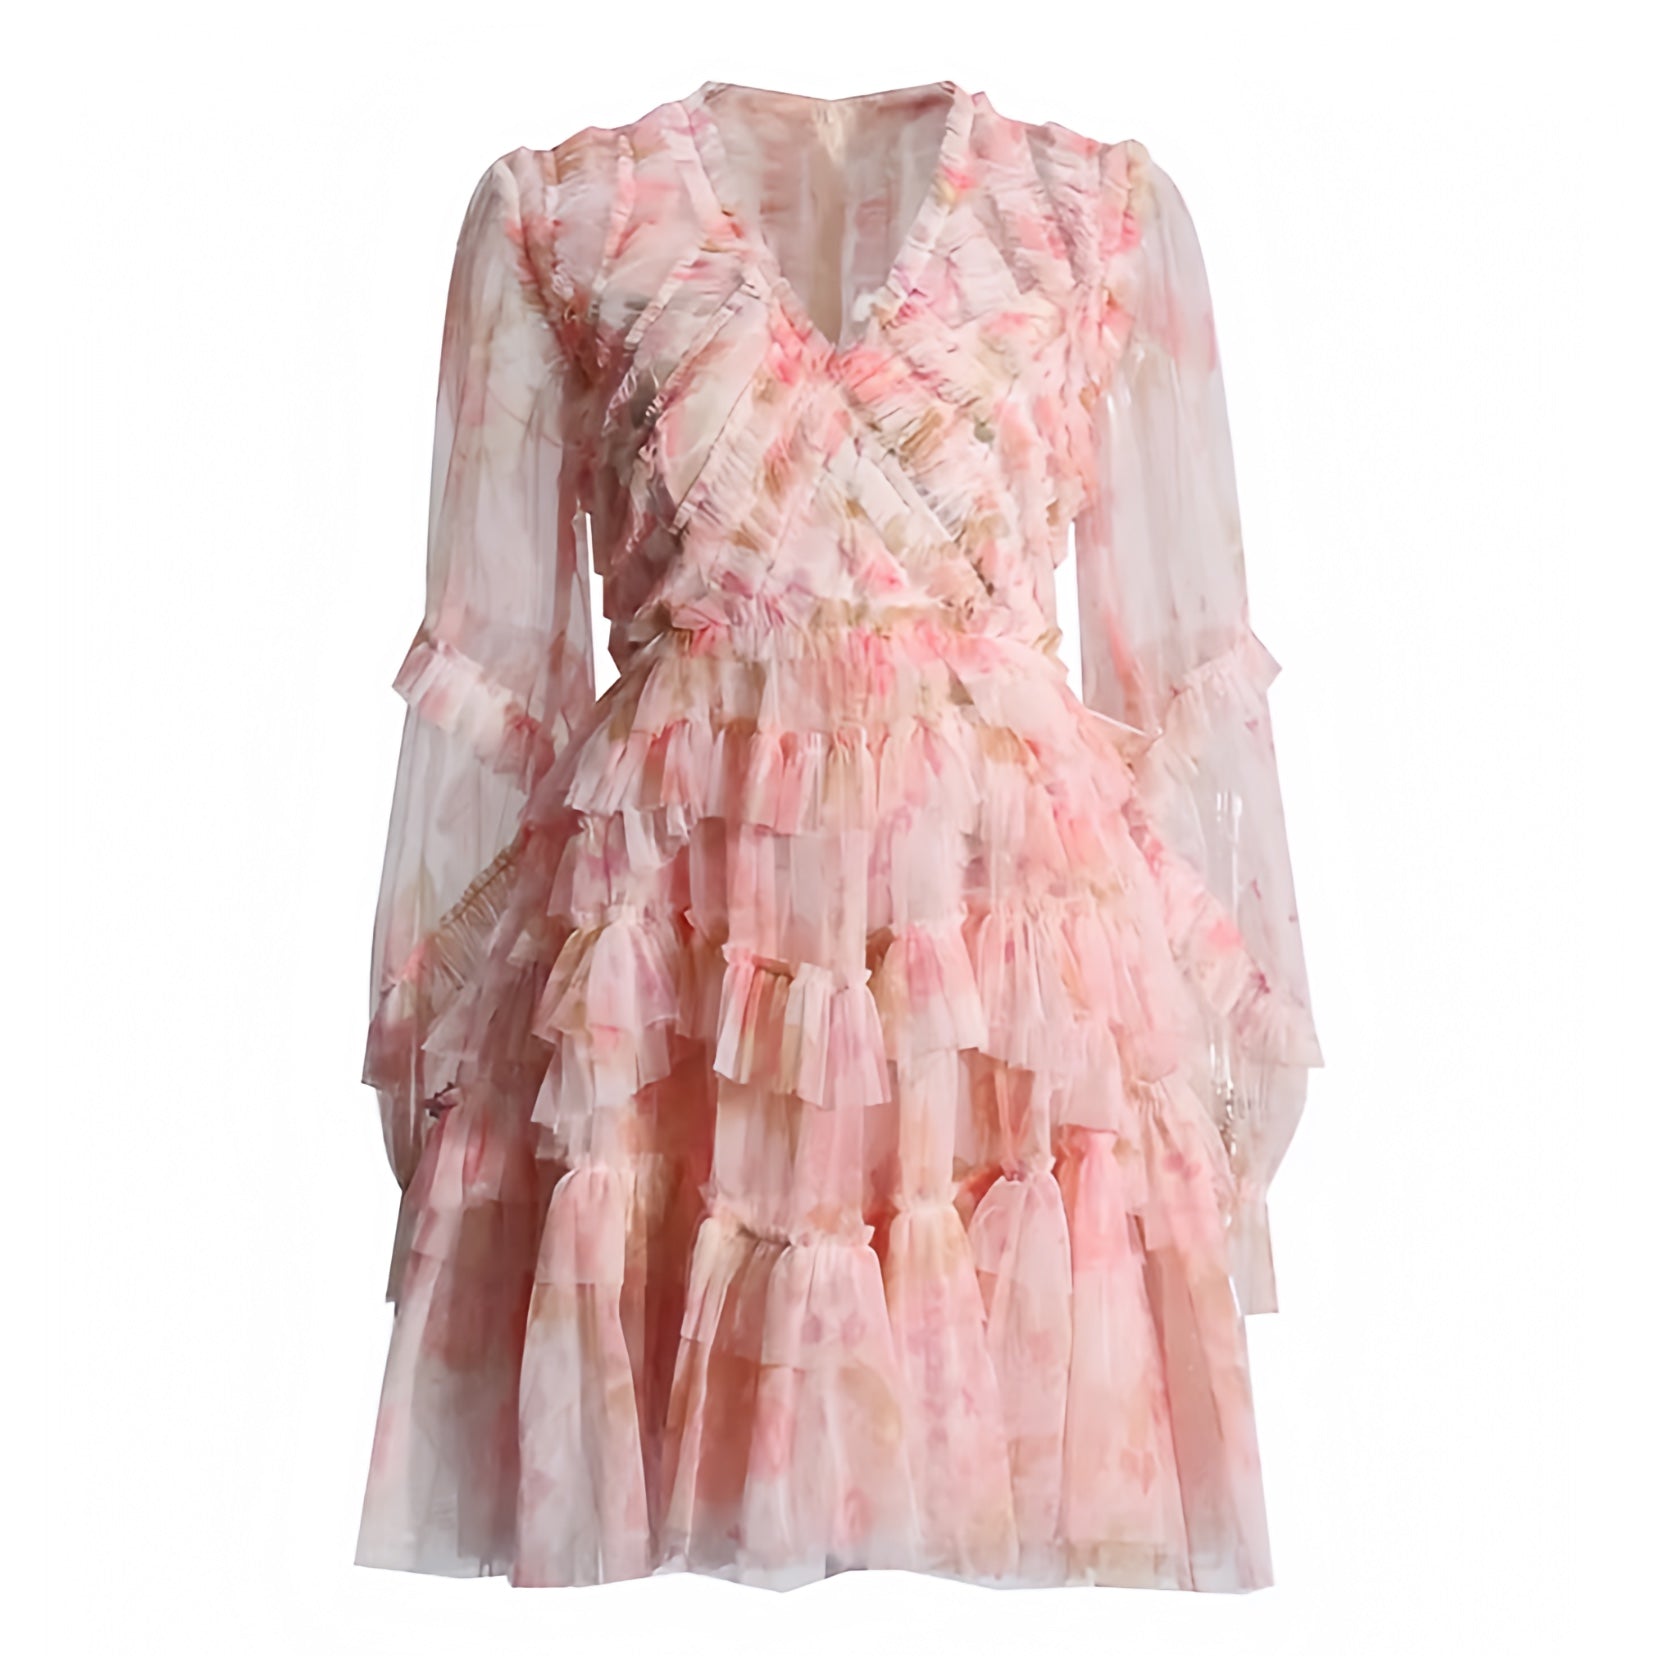 light-pink-multi-color-floral-patterned-layered-ruffle-trim-feathered-slim-fit-bodycon-fitted-bodice-drop-waist-v-neck-mesh-translucent-long-sleeve-mini-short-dress-ball-gown-couture-women-ladies-chic-trendy-spring-2024-summer-elegant-semi-formal-casual-classy-feminine-gala-prom-debutante-wedding-guest-party-preppy-style-beach-vacation-sundress-altard-state-zimmerman-revolve-loveshackfancy-fillyboo-reformation-dupe